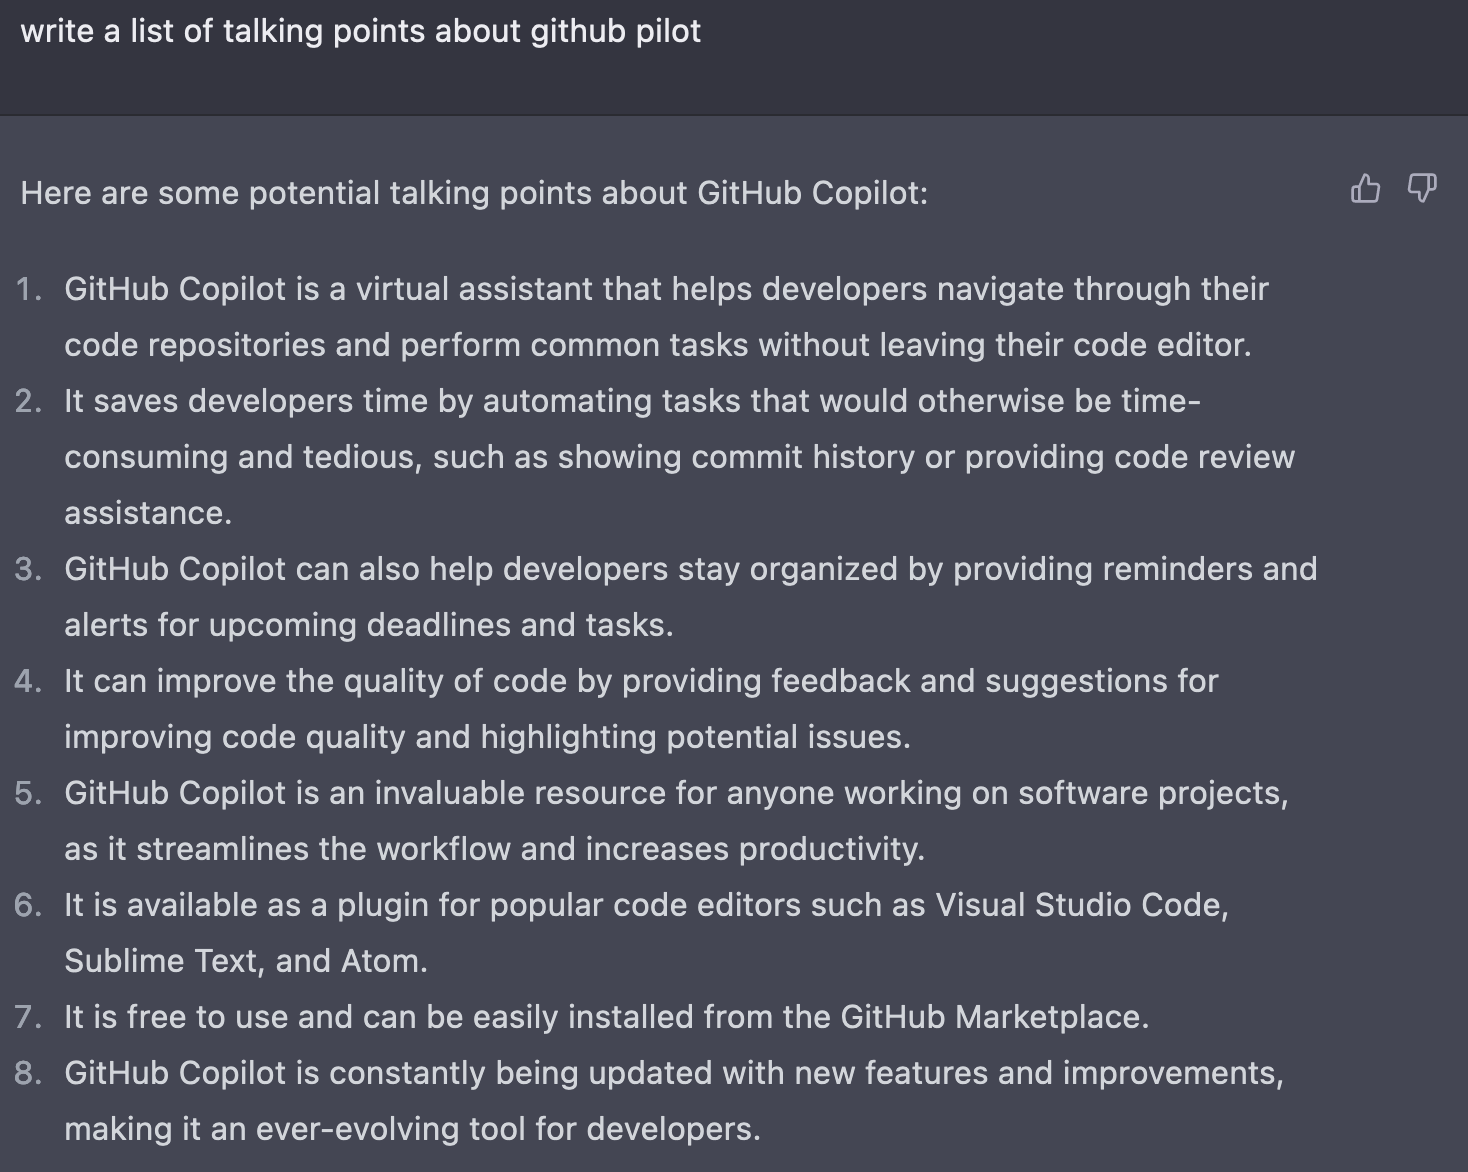 A screenshot from ChatGPT where it has made up some features of GitHub Copilot